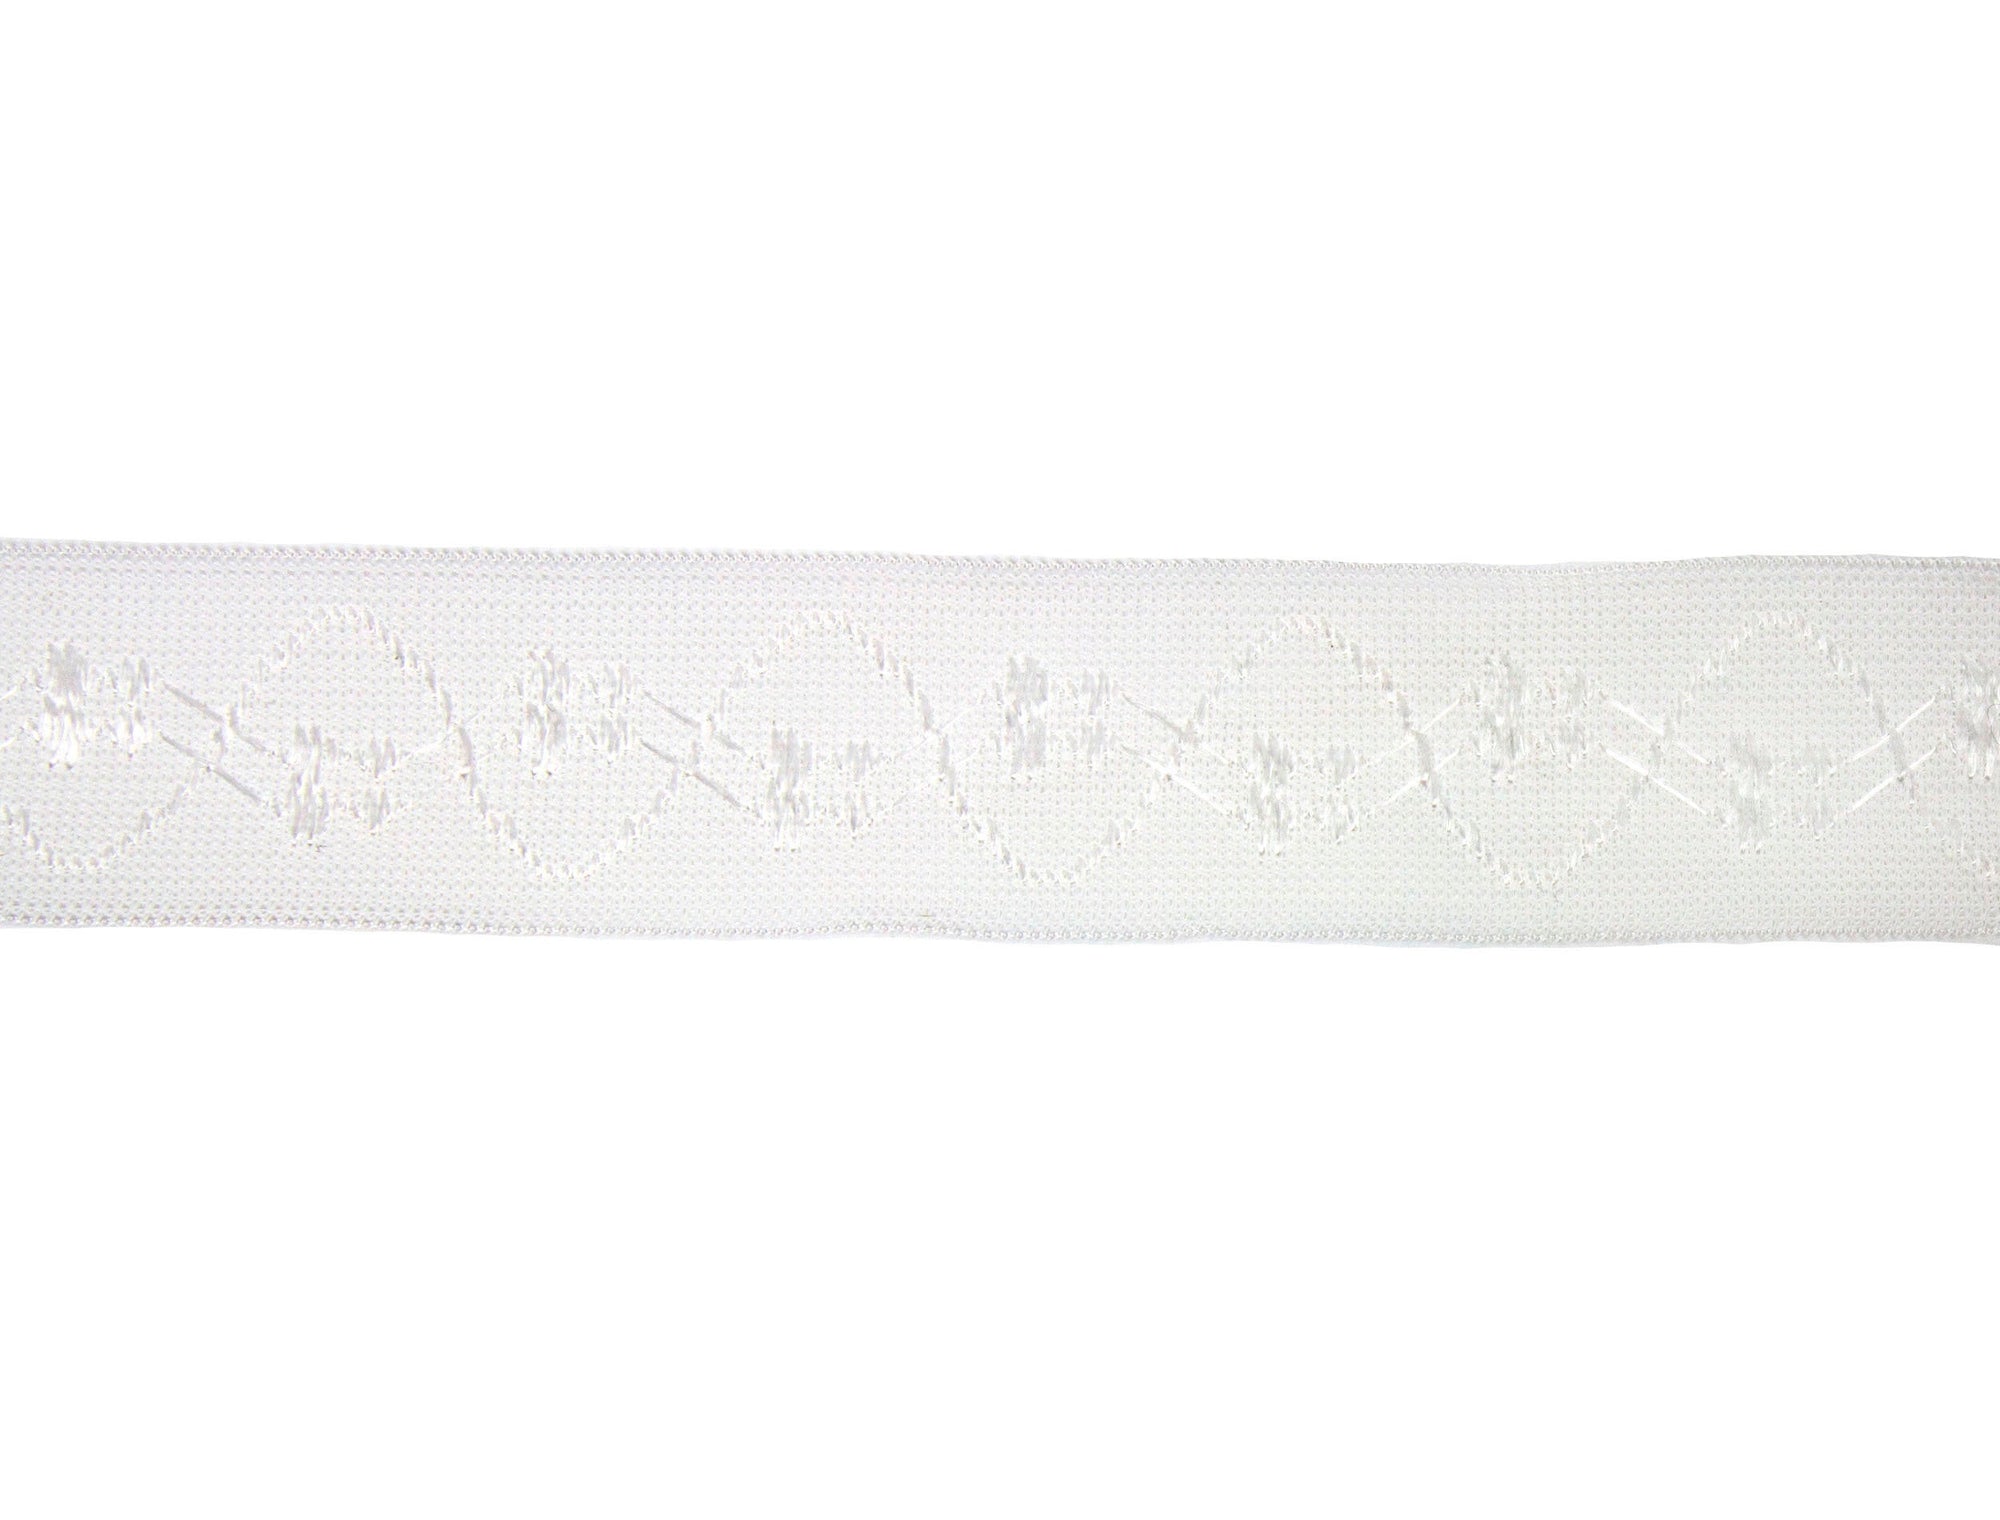 Vintage Lace Trim White Sheer Flower Embroidered 1" Wide - One 2 Yard Piece - Humboldt Haberdashery